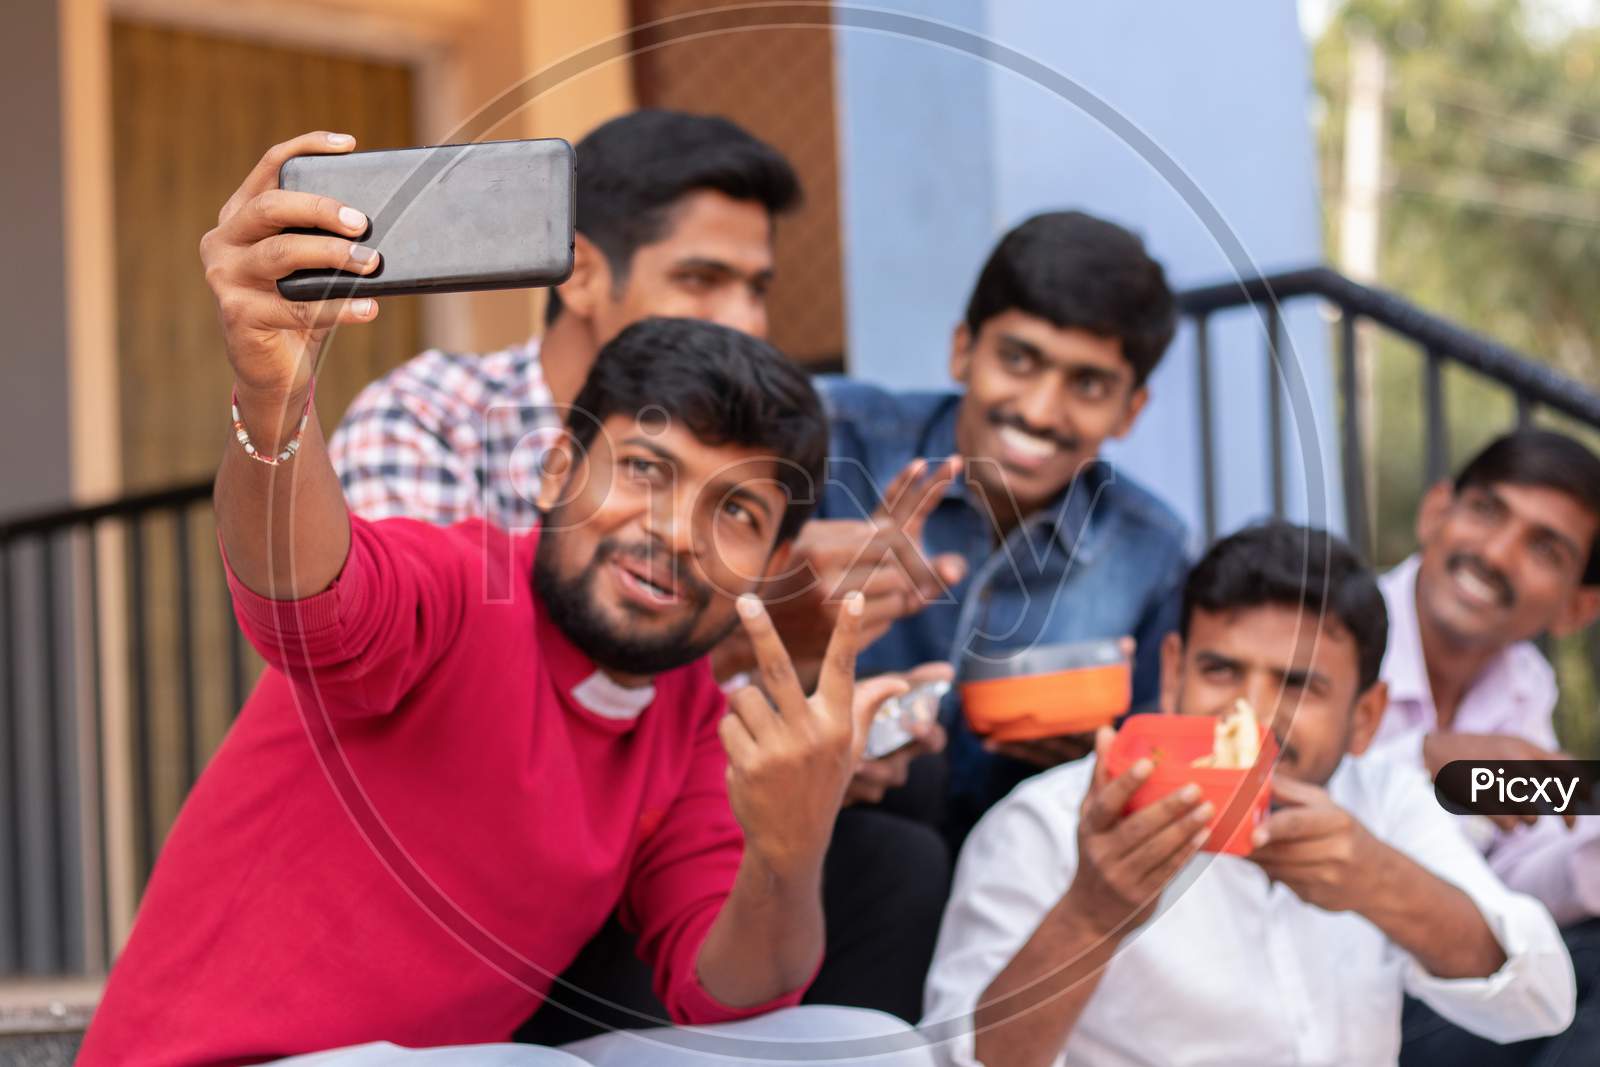 A Group of Young Men's taking a Selfie while having Lunch together At a University Campus or College Campus